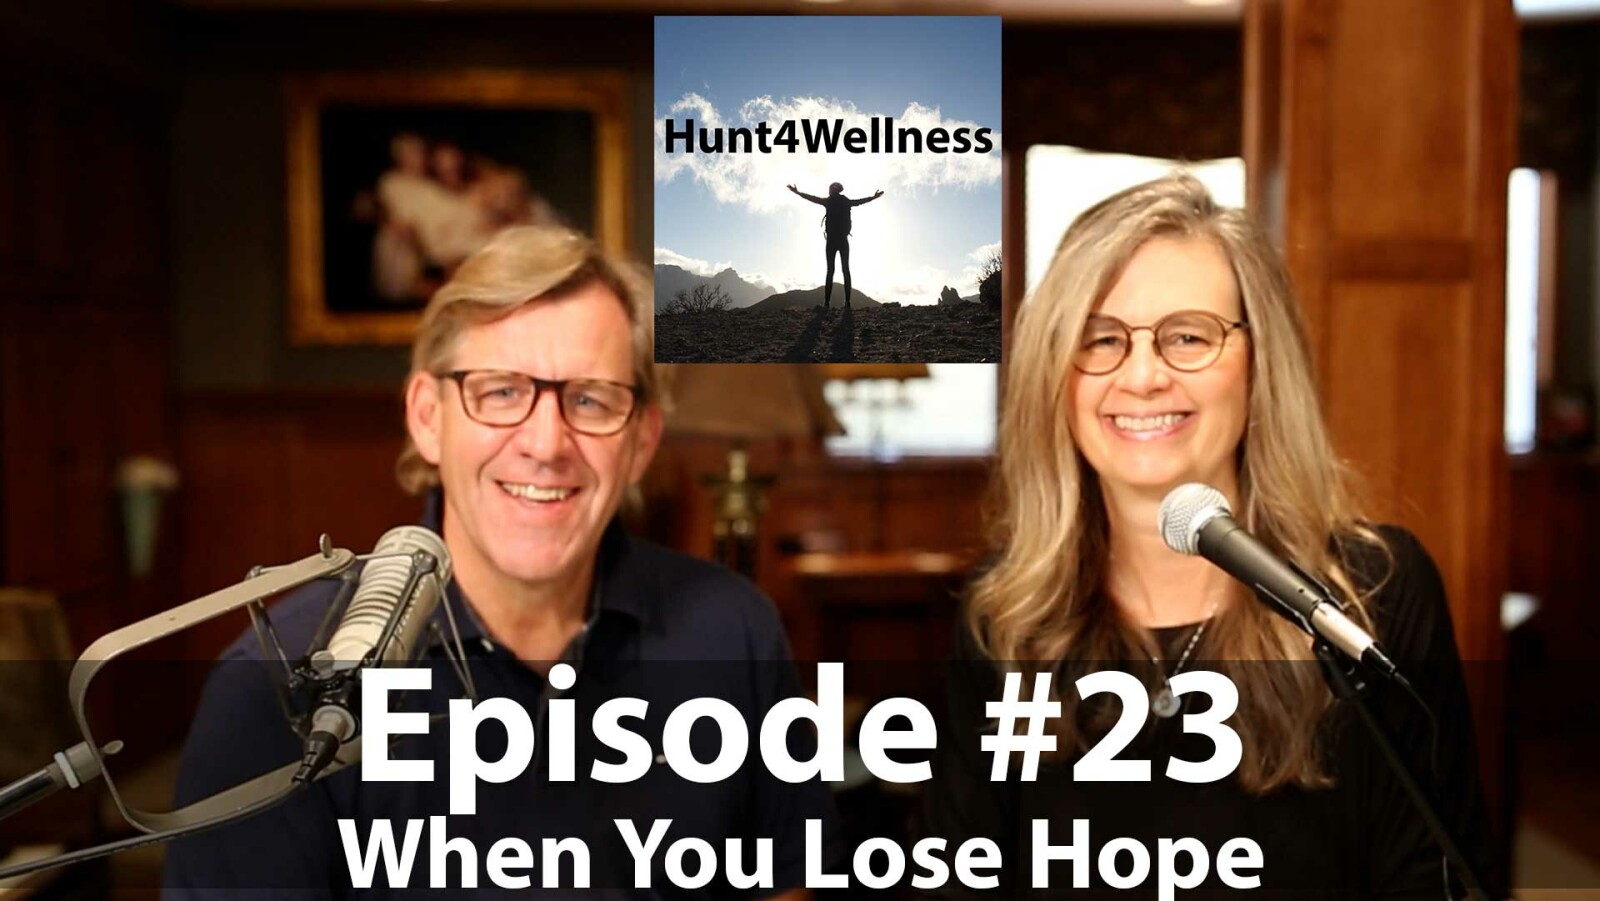 Episode #23 - When You Lose Hope